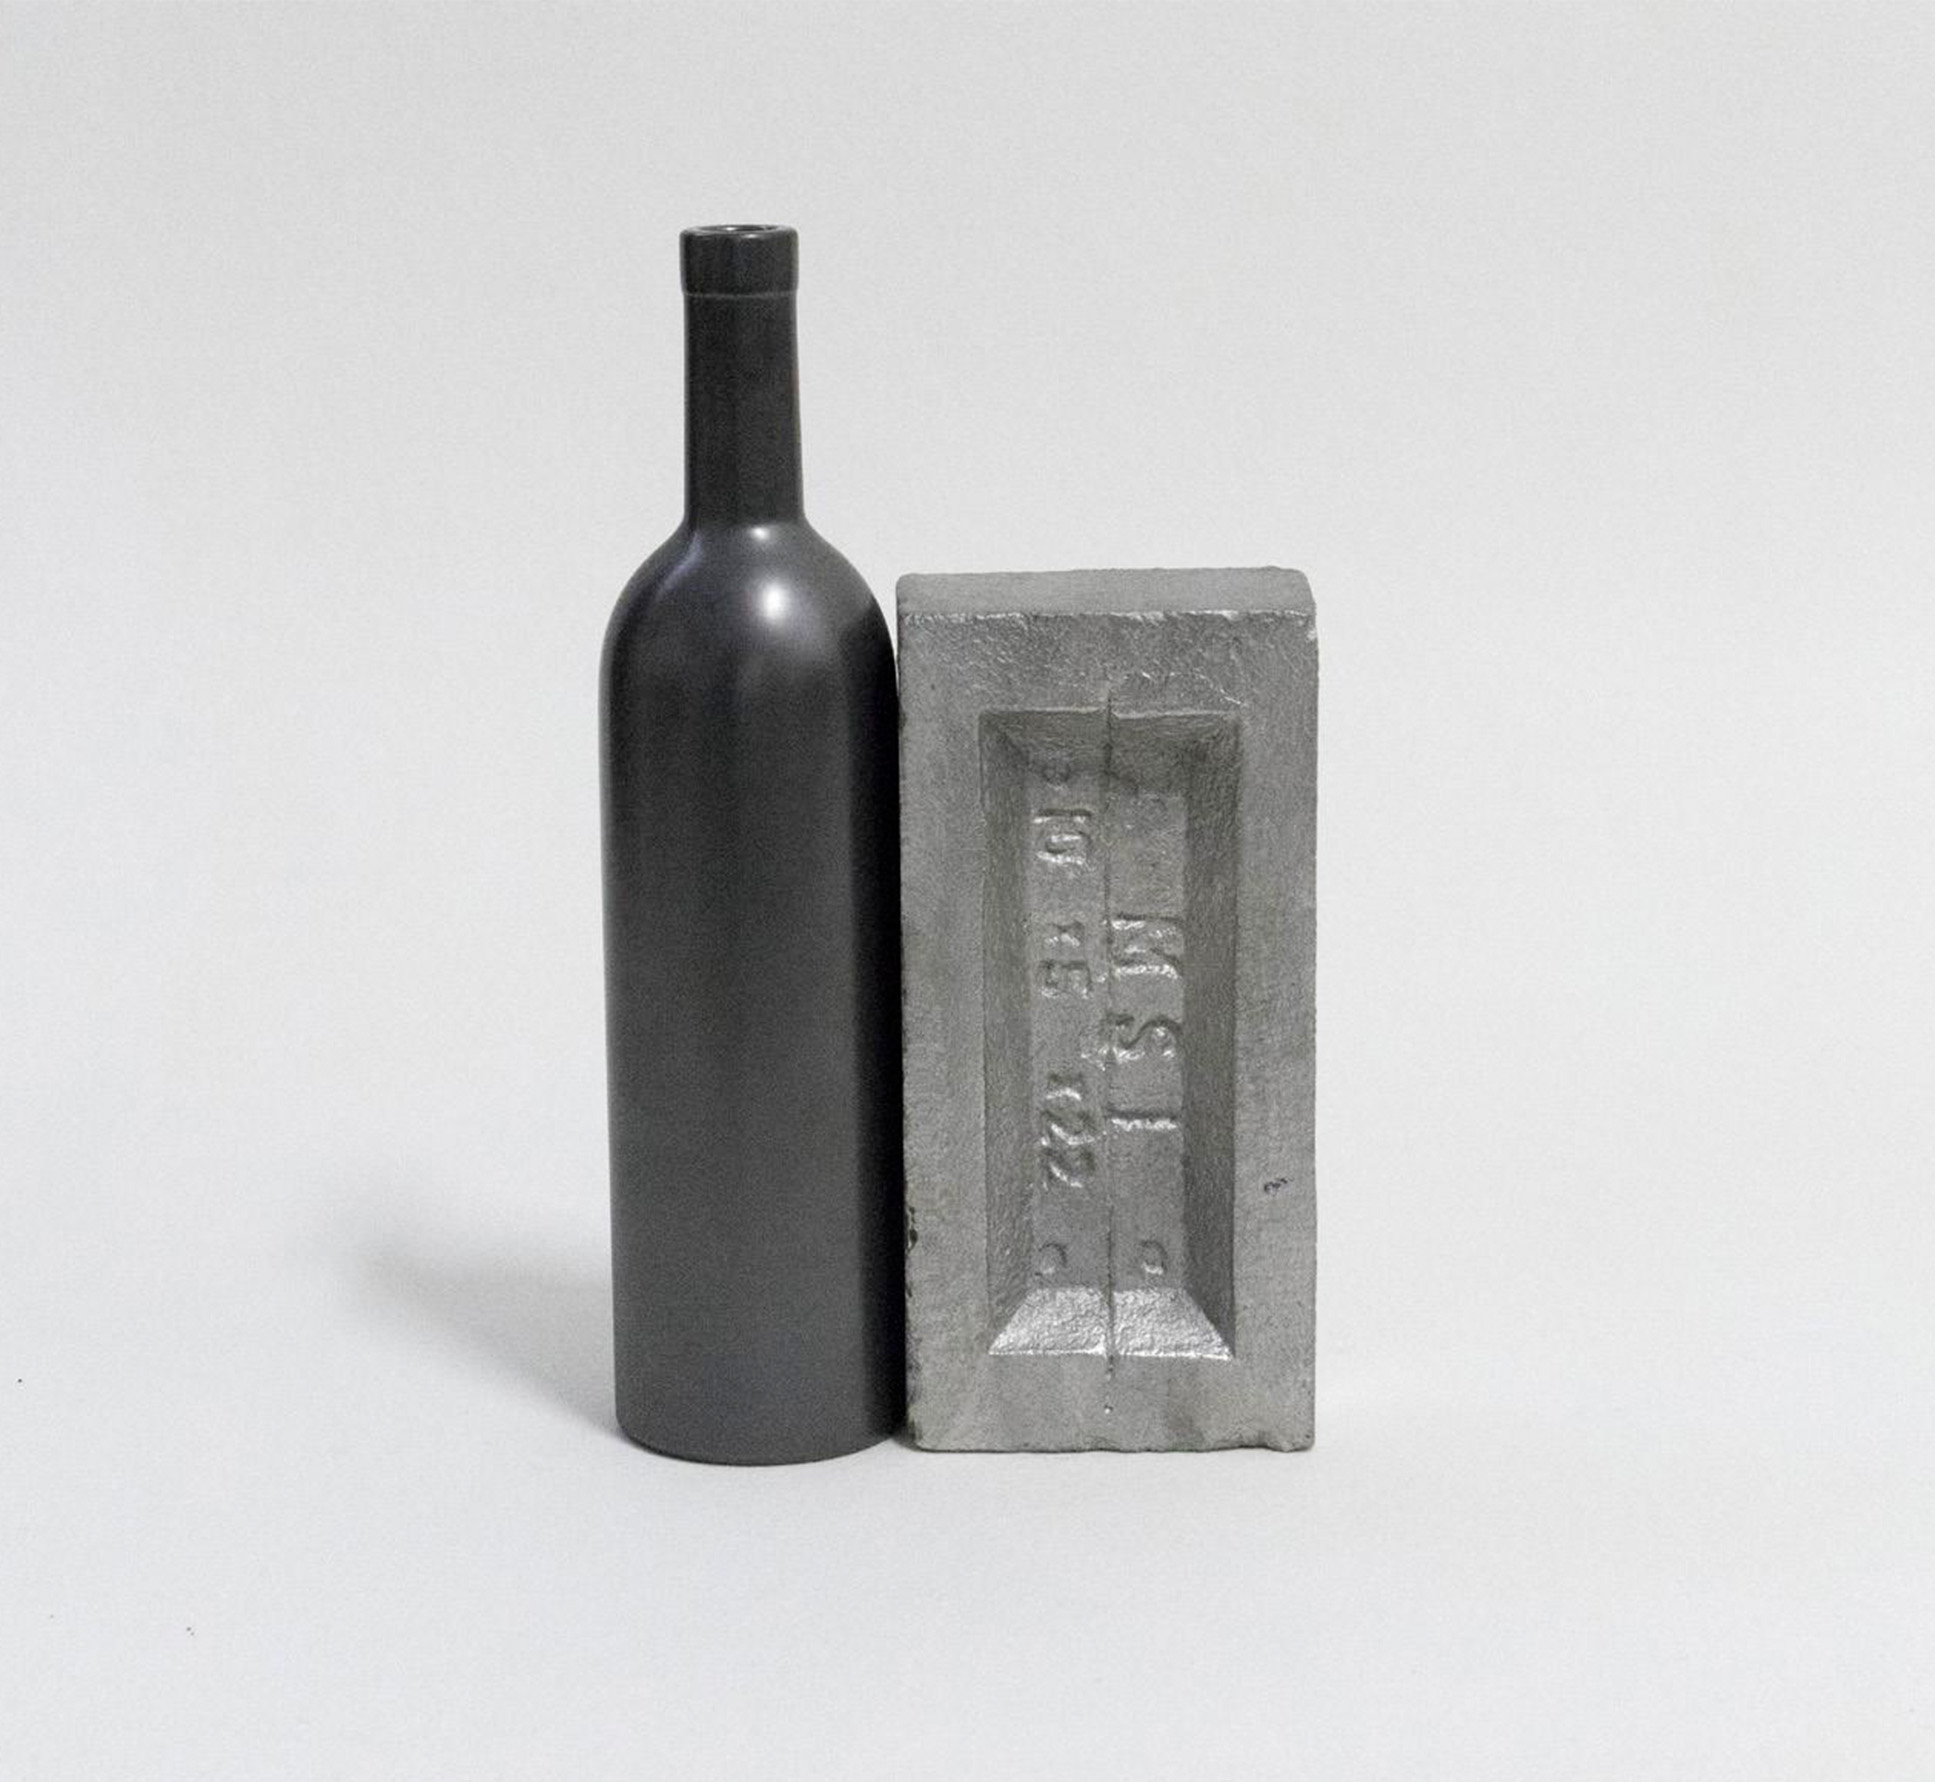 carlos nunes_the bottle and the brick from the acromic objects series_2017-2023